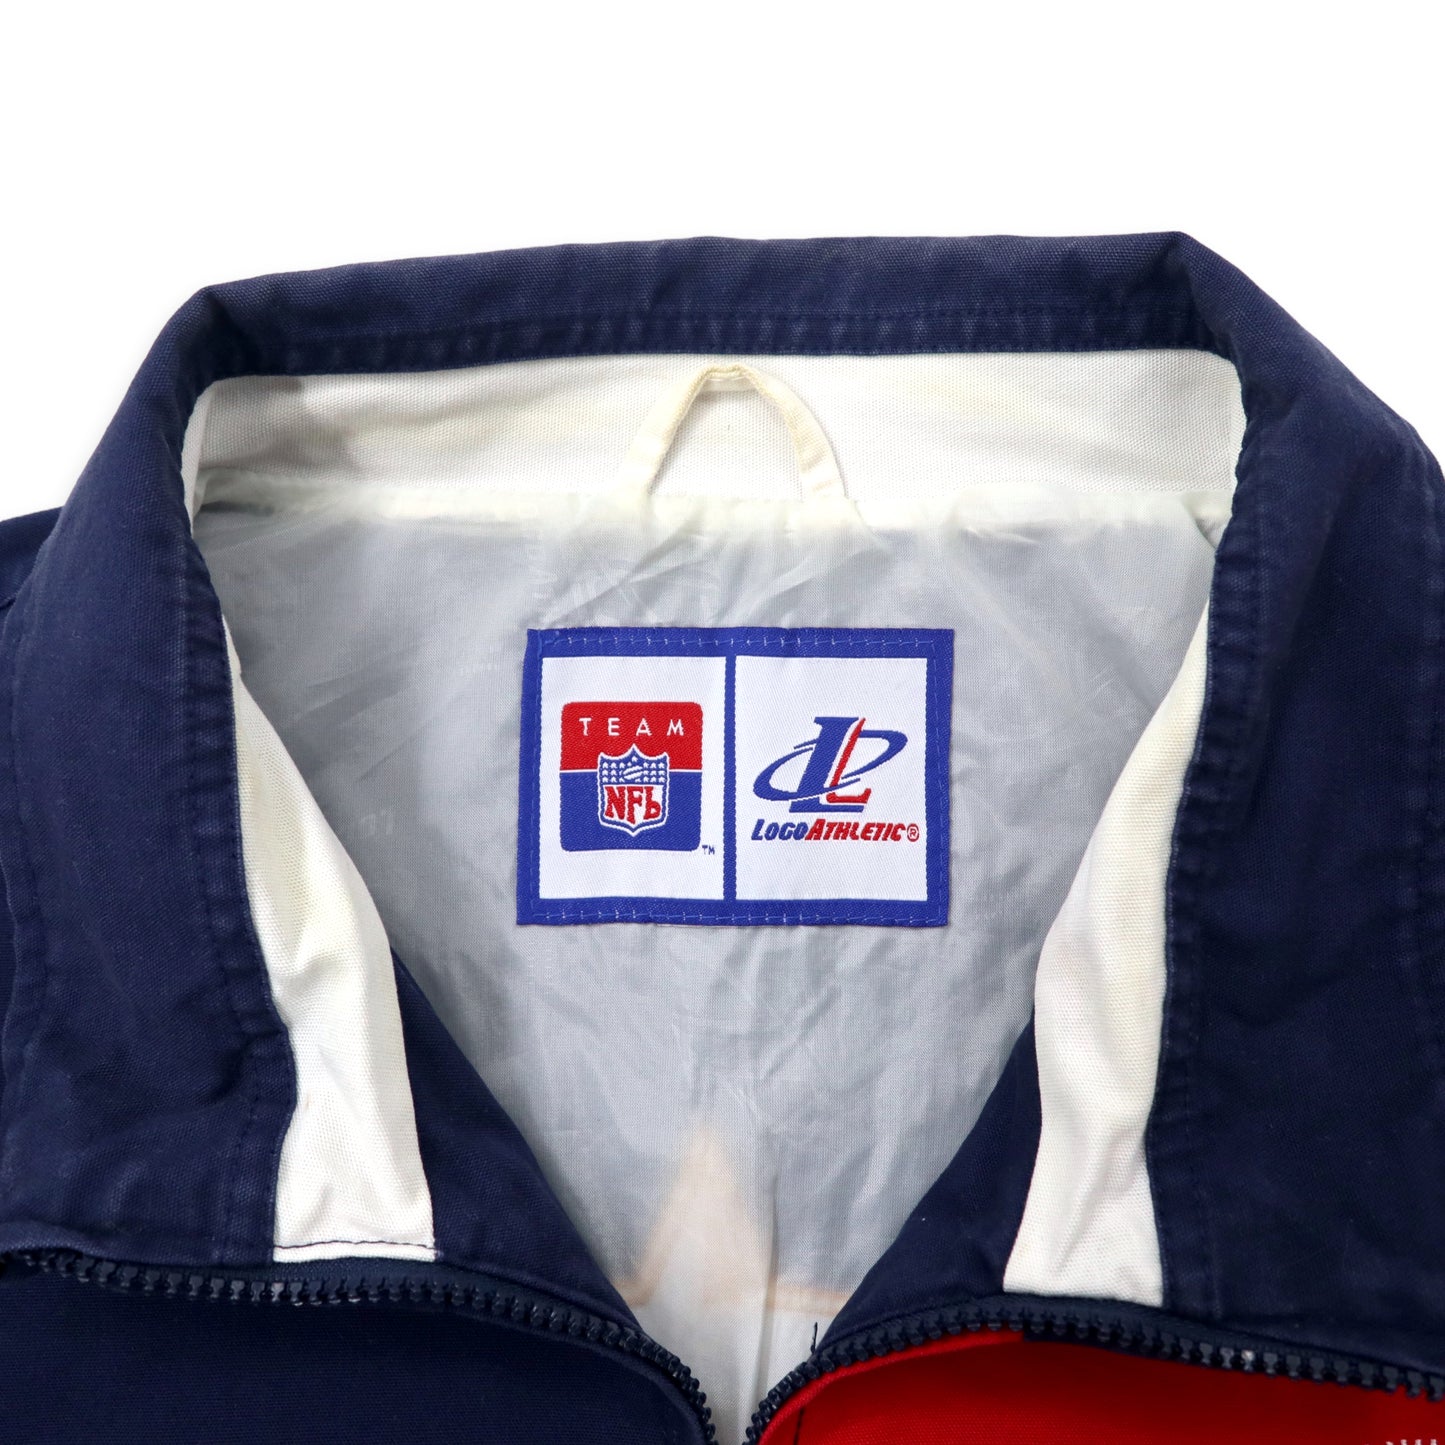 LOGO7 NFL 90's Swing Top Sports Jacket XL Navy Red Cotton